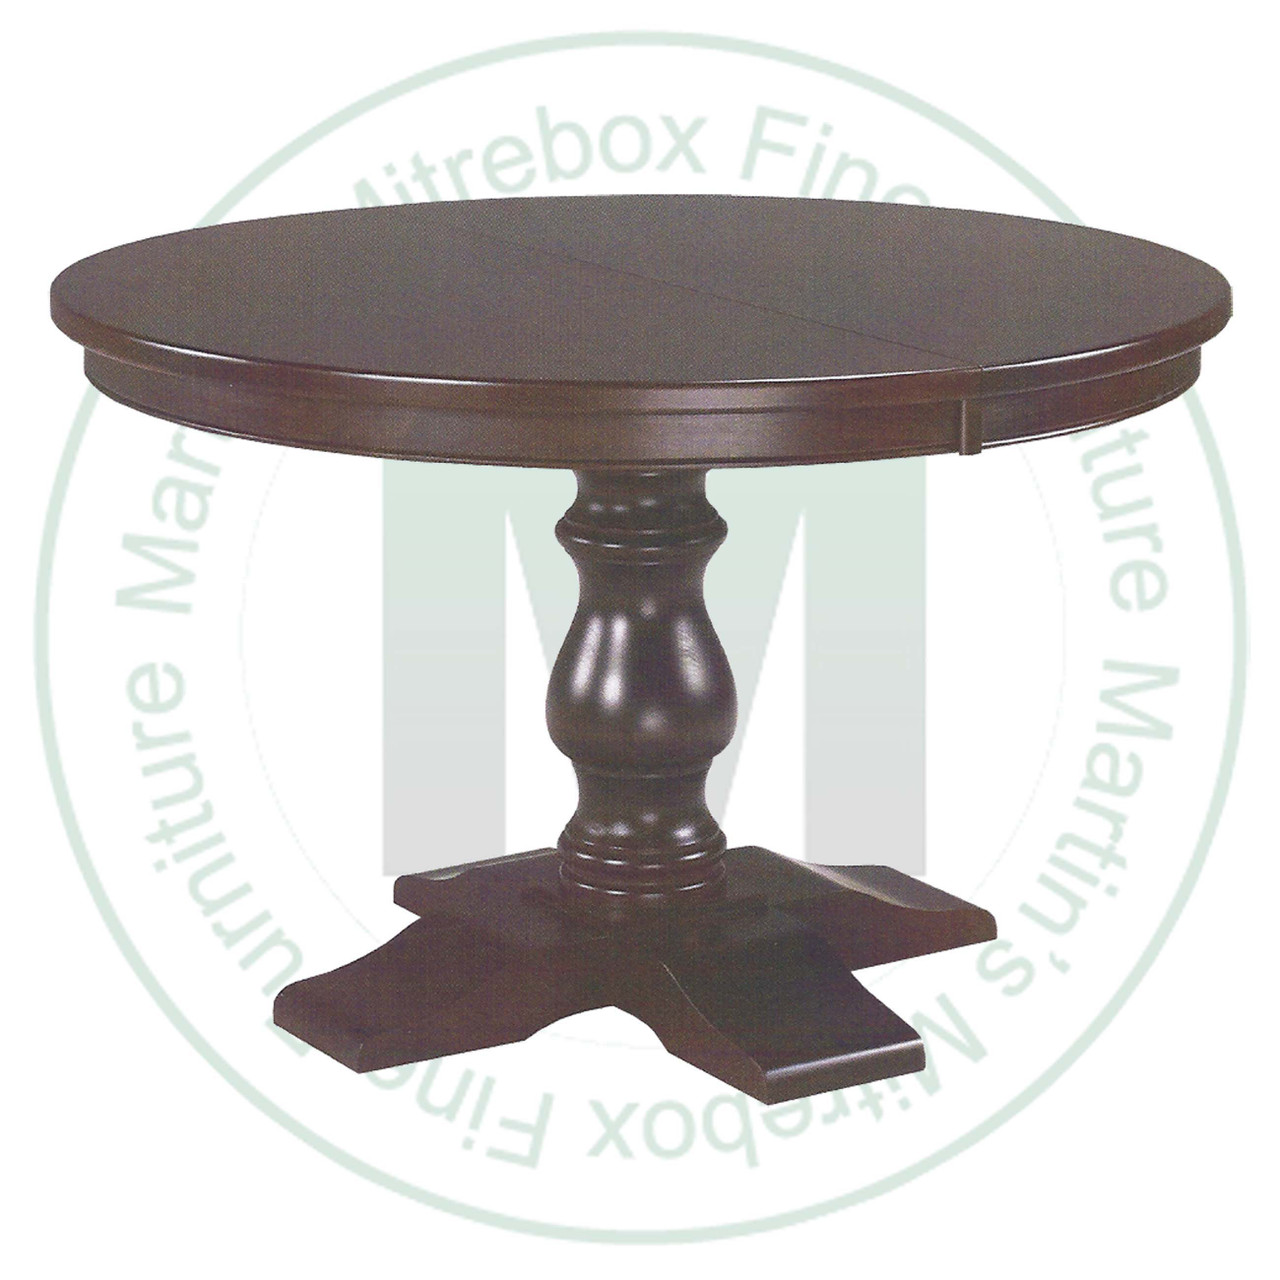 Wormy Maple Savannah Single Pedestal Table 42''D x 42''W x 30''H With 2 - 12'' Leaves Table. Table Has 1'' Thick Top.